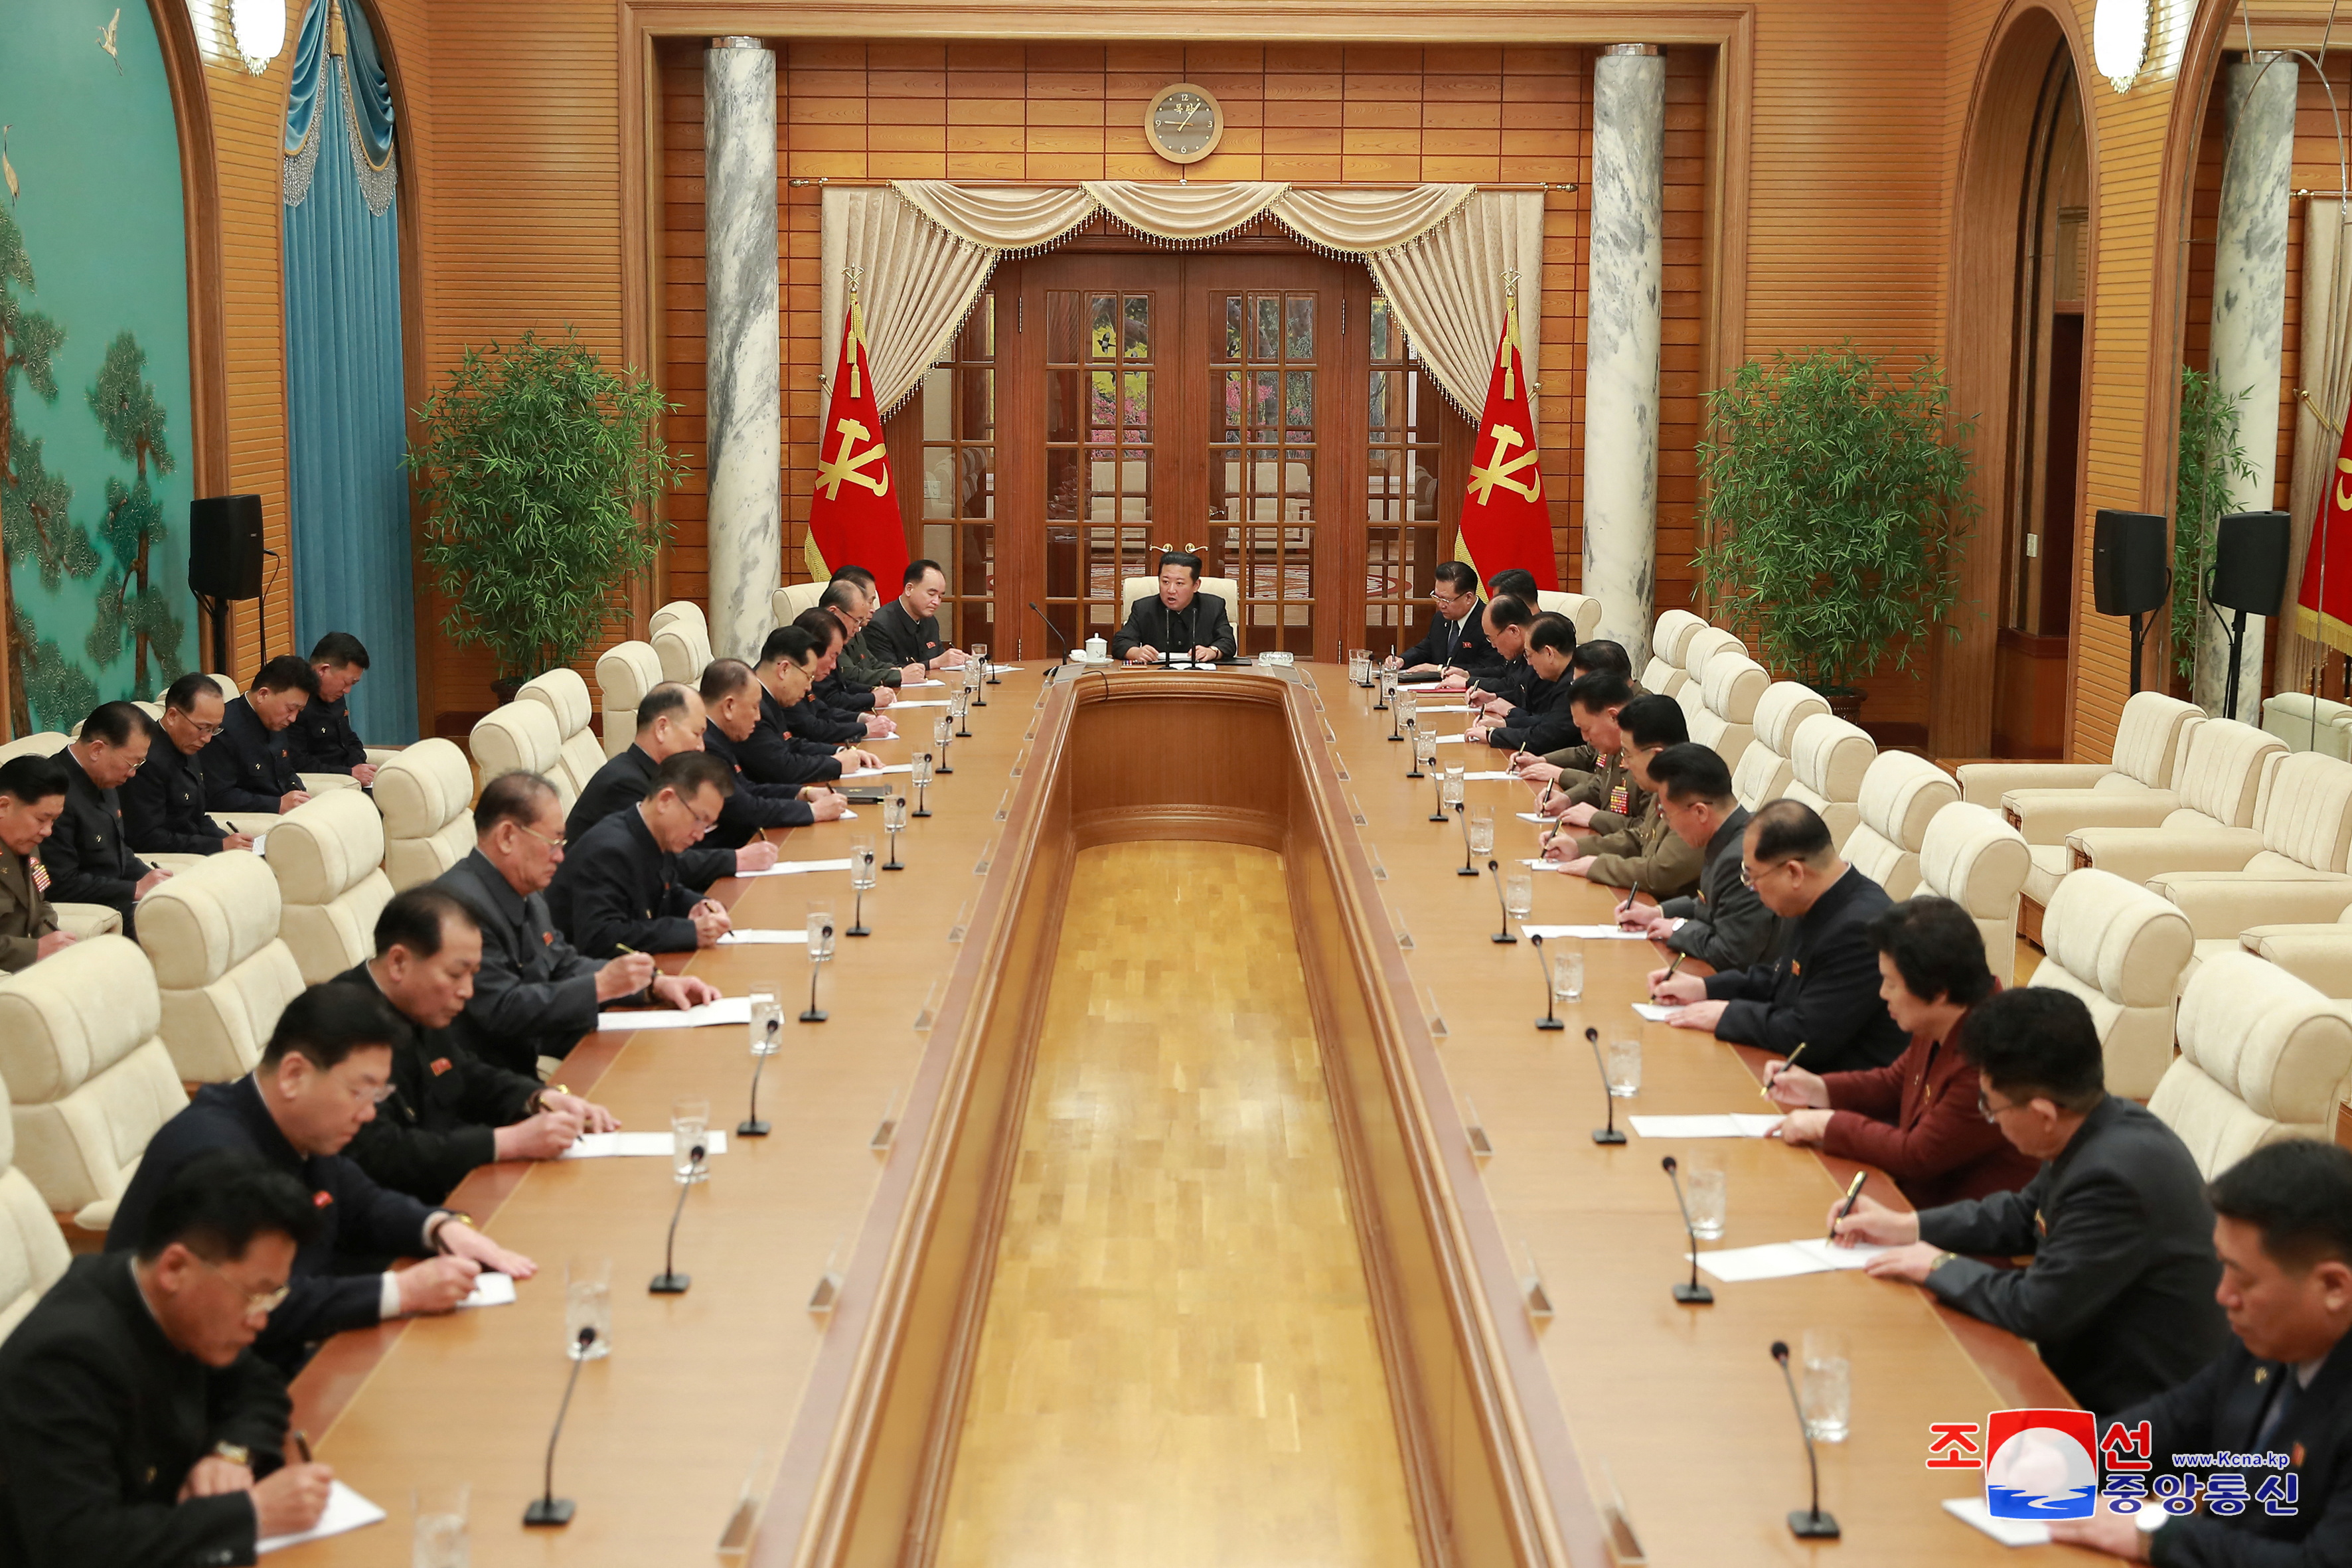 North Korean leader Kim Jong Un attends a meeting of the politburo of the ruling Workers' Party in Pyongyang